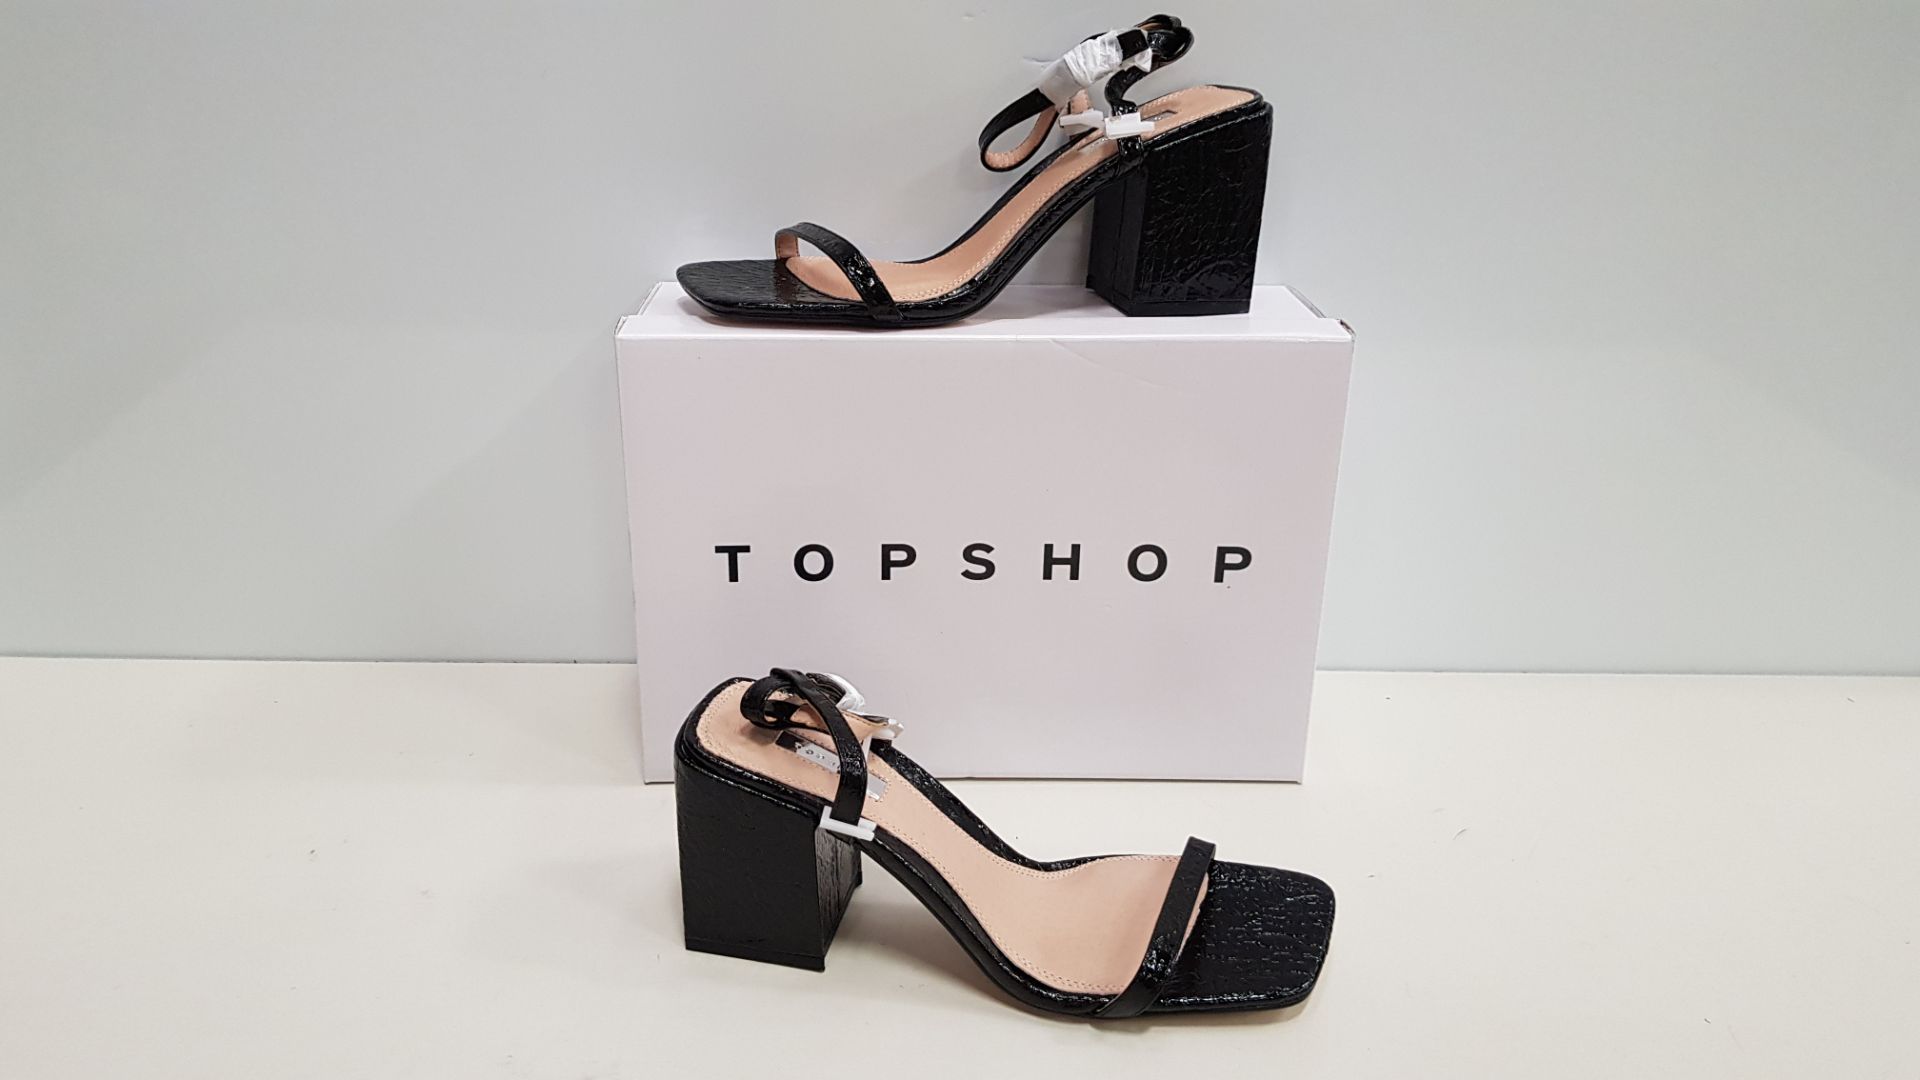 19 X BRAND NEW TOPSHOP NORA BLACK HEELED SHOES UK SIZE 6 RRP £39.00 (TOTAL RRP £741.00)